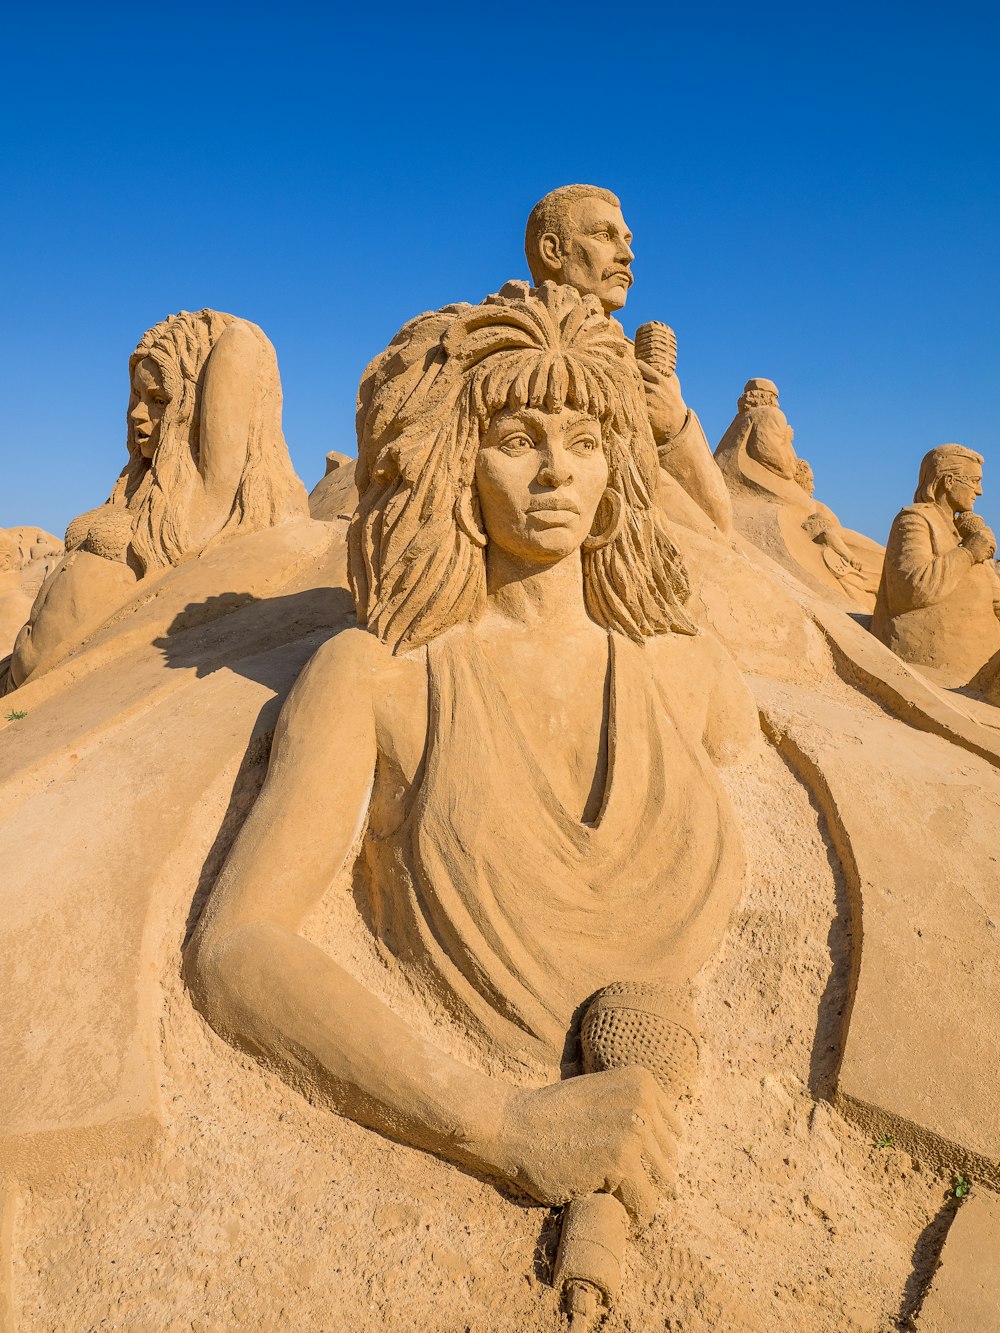 a sand sculpture of a woman sitting in the sand